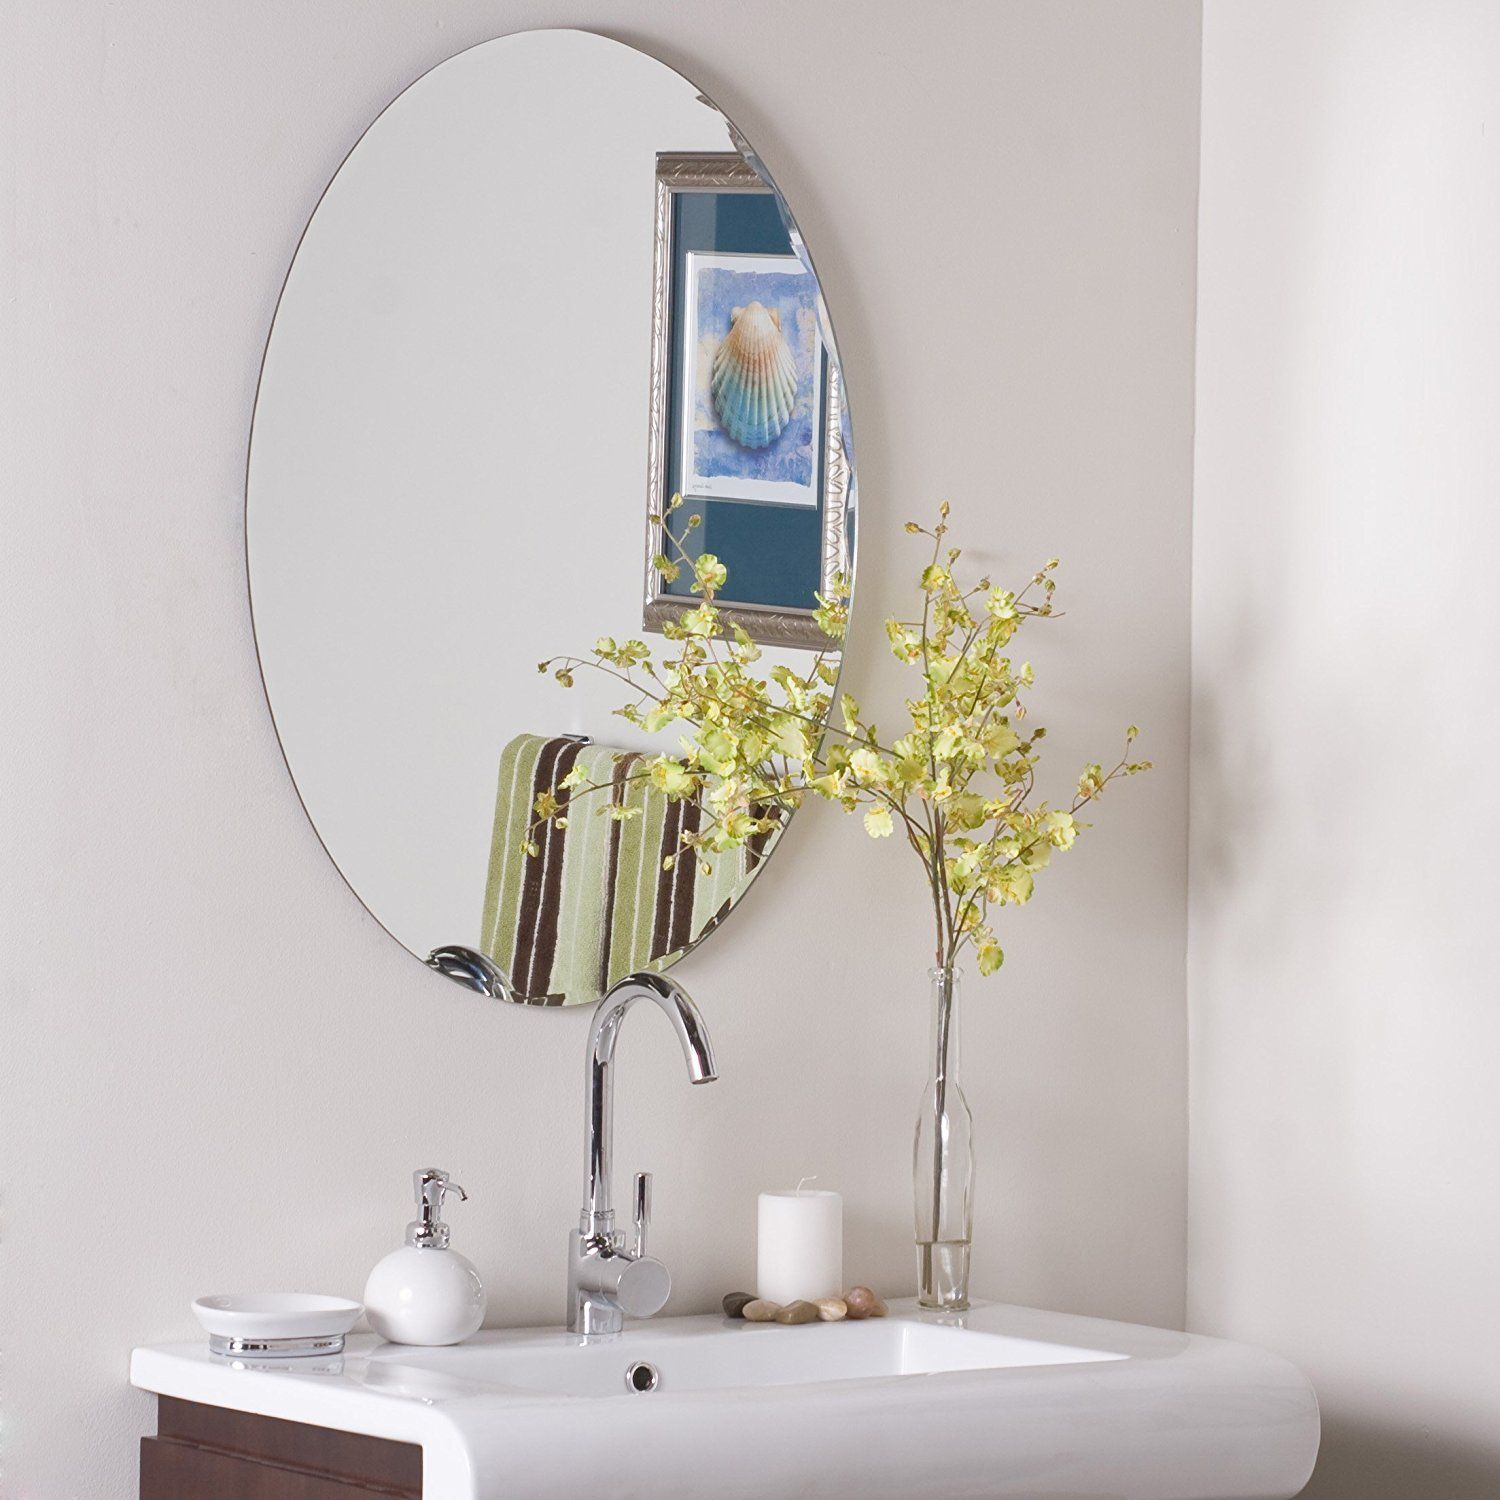 Decor Wonderland Frameless Oval Scallop Beveled Mirror >>> You Can Find With Regard To Reign Frameless Oval Scalloped Beveled Wall Mirrors (View 12 of 15)